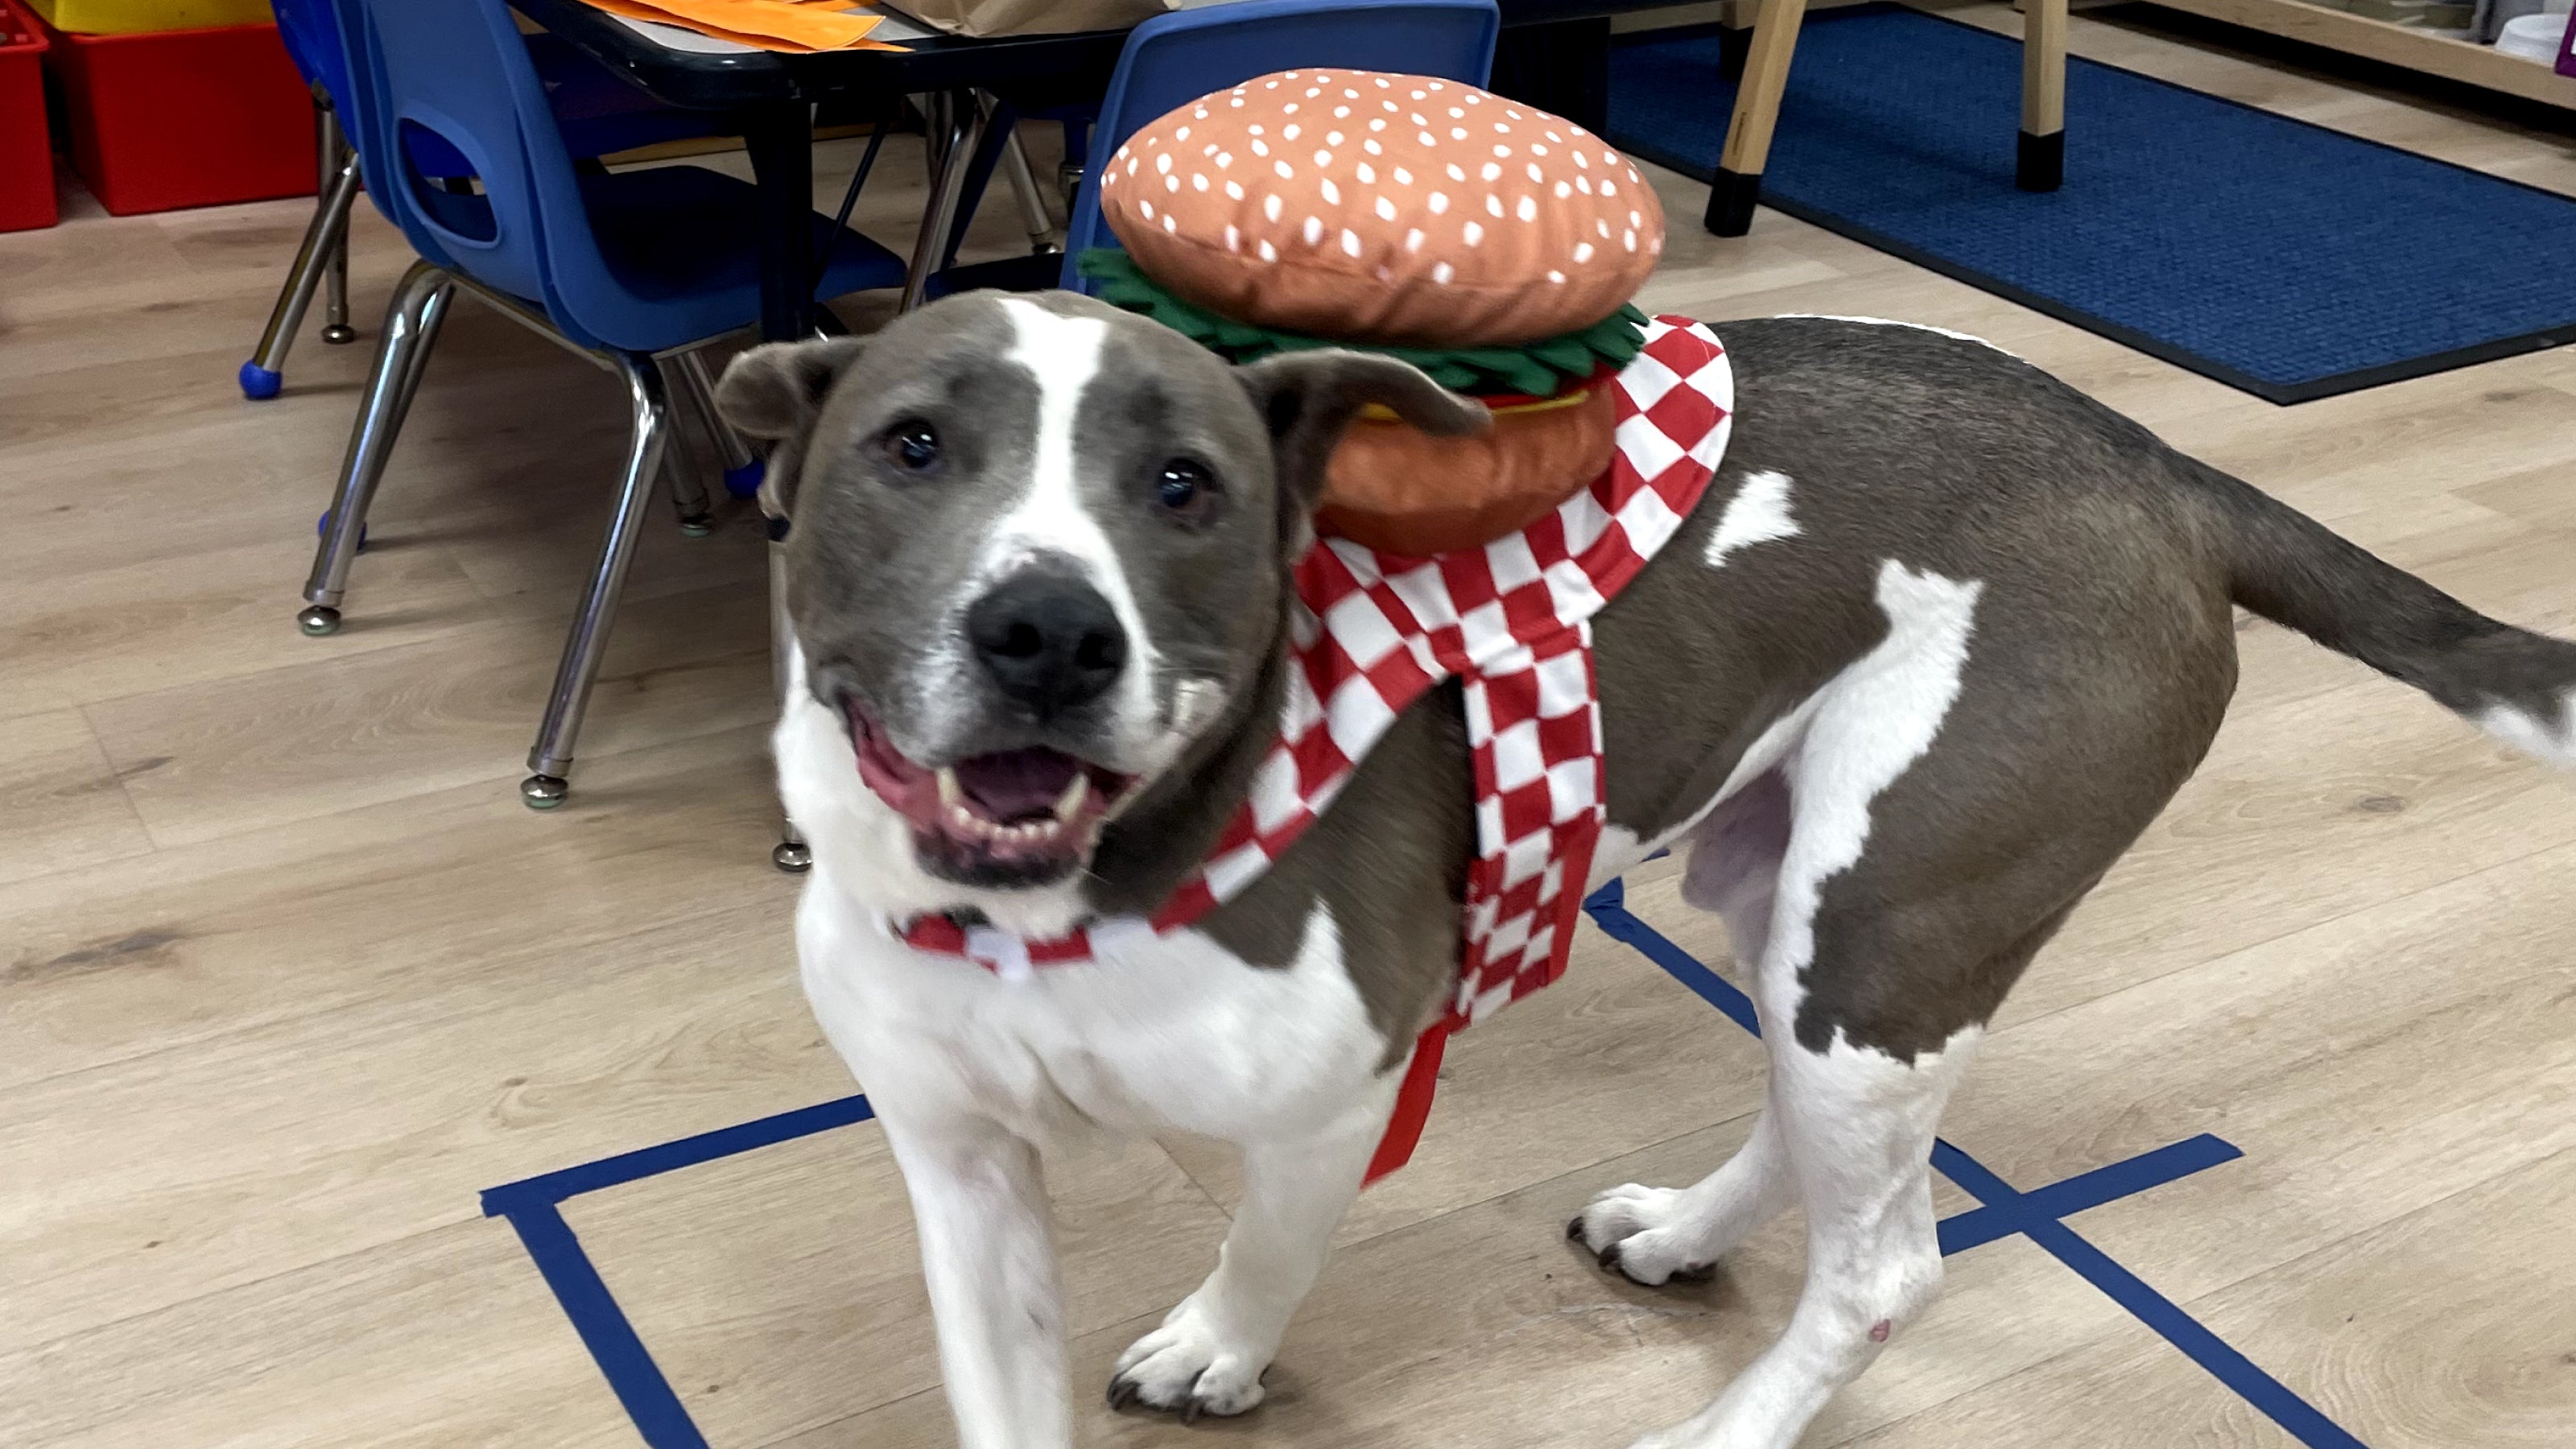 A brown and white dog wearing a hamburger costume